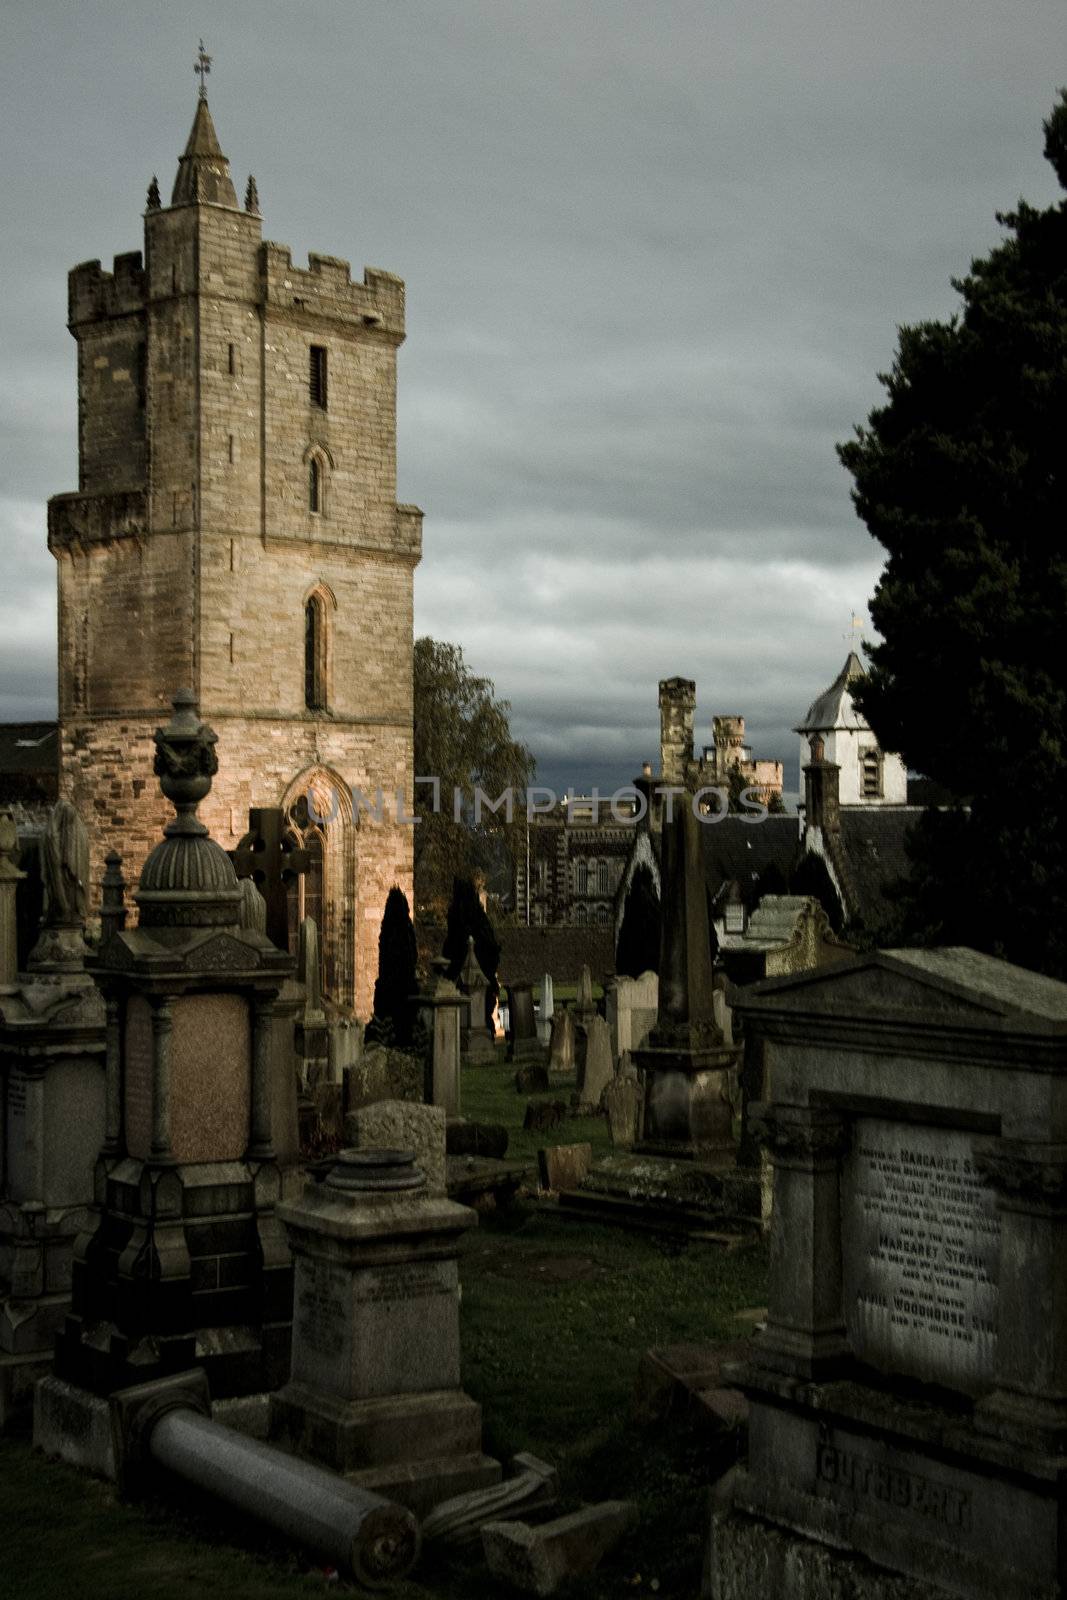 mystic cemetery in stirling with illuminated tower in background